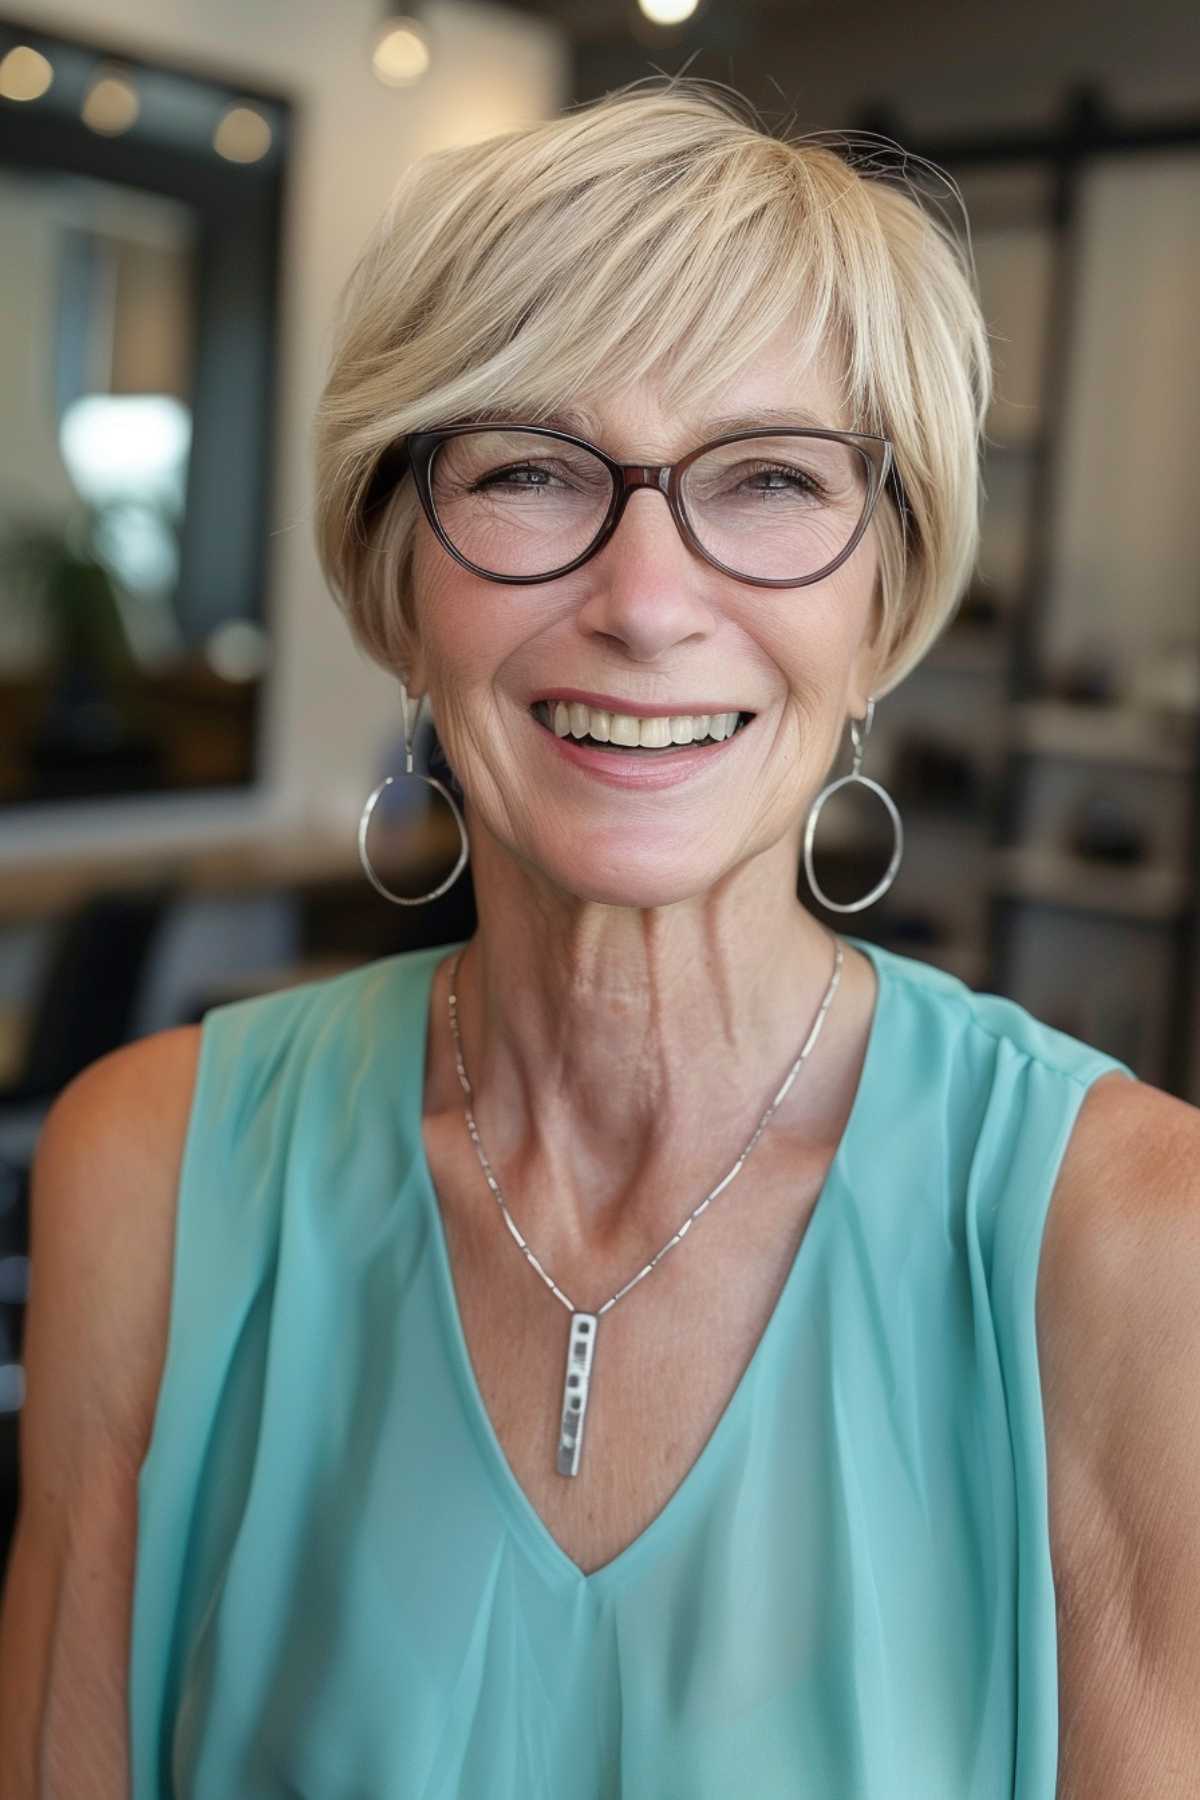 Mature woman sporting a chic short pixie cut with asymmetrical bangs, complemented by stylish glasses.